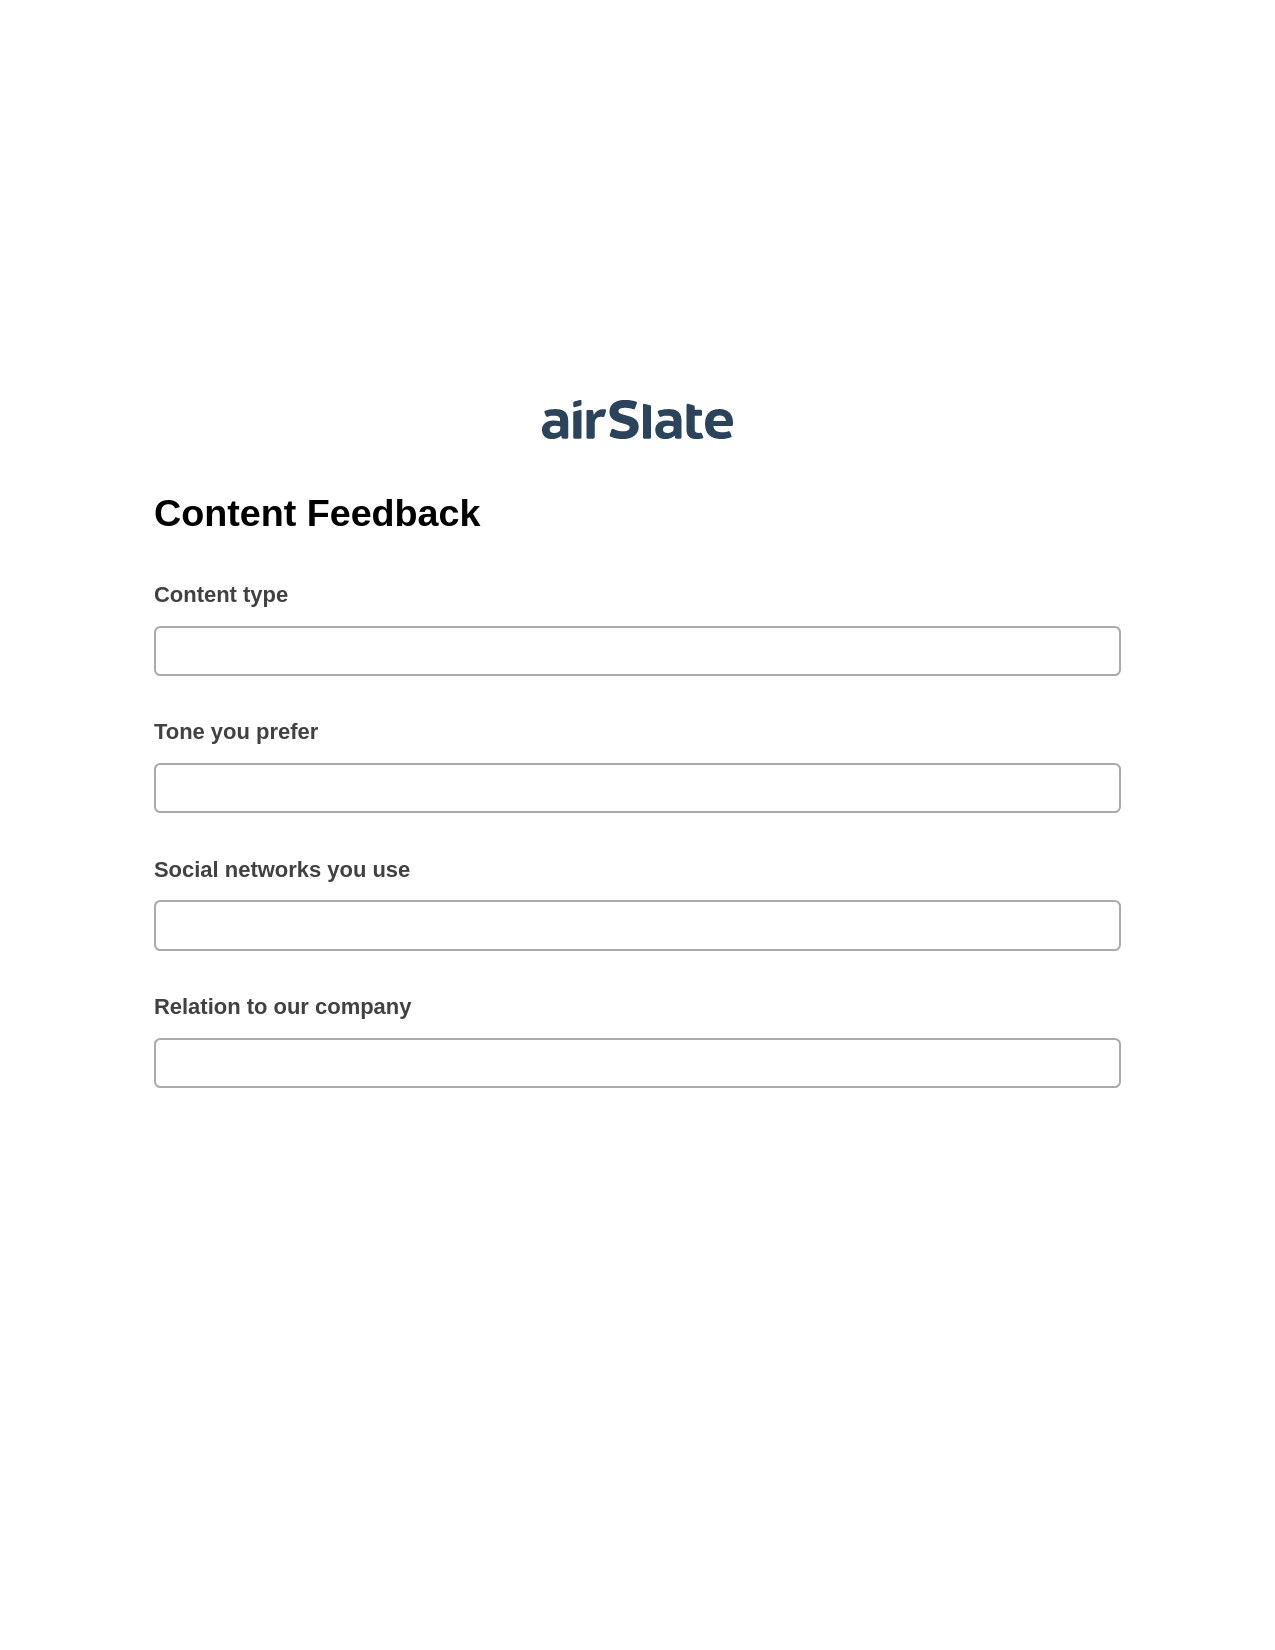 Multirole Content Feedback Pre-fill from CSV File Bot, Remove Slate Bot, Post-finish Document Bot